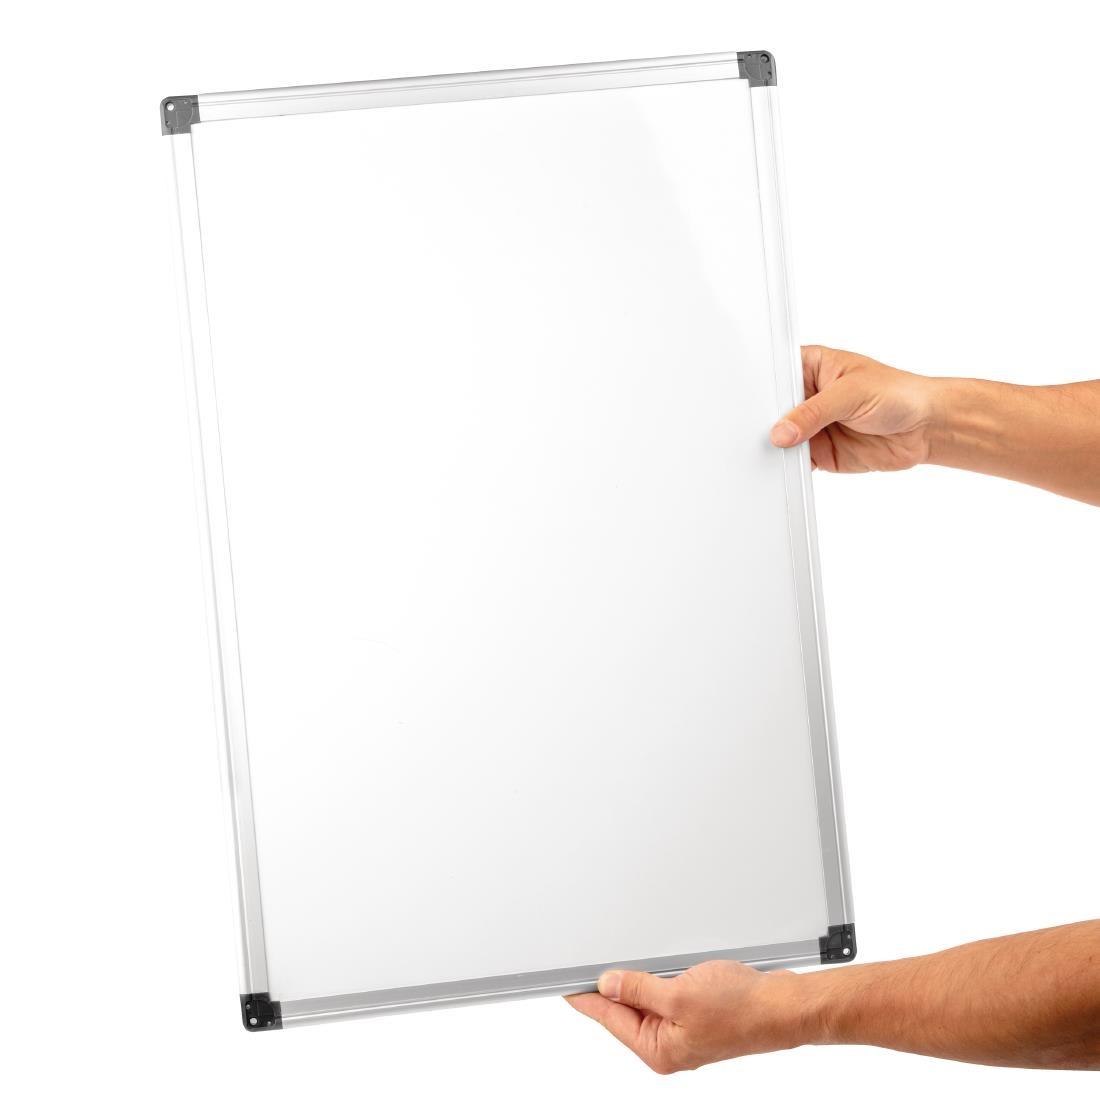 Olympia White Magnetic Board - GG045  - 2